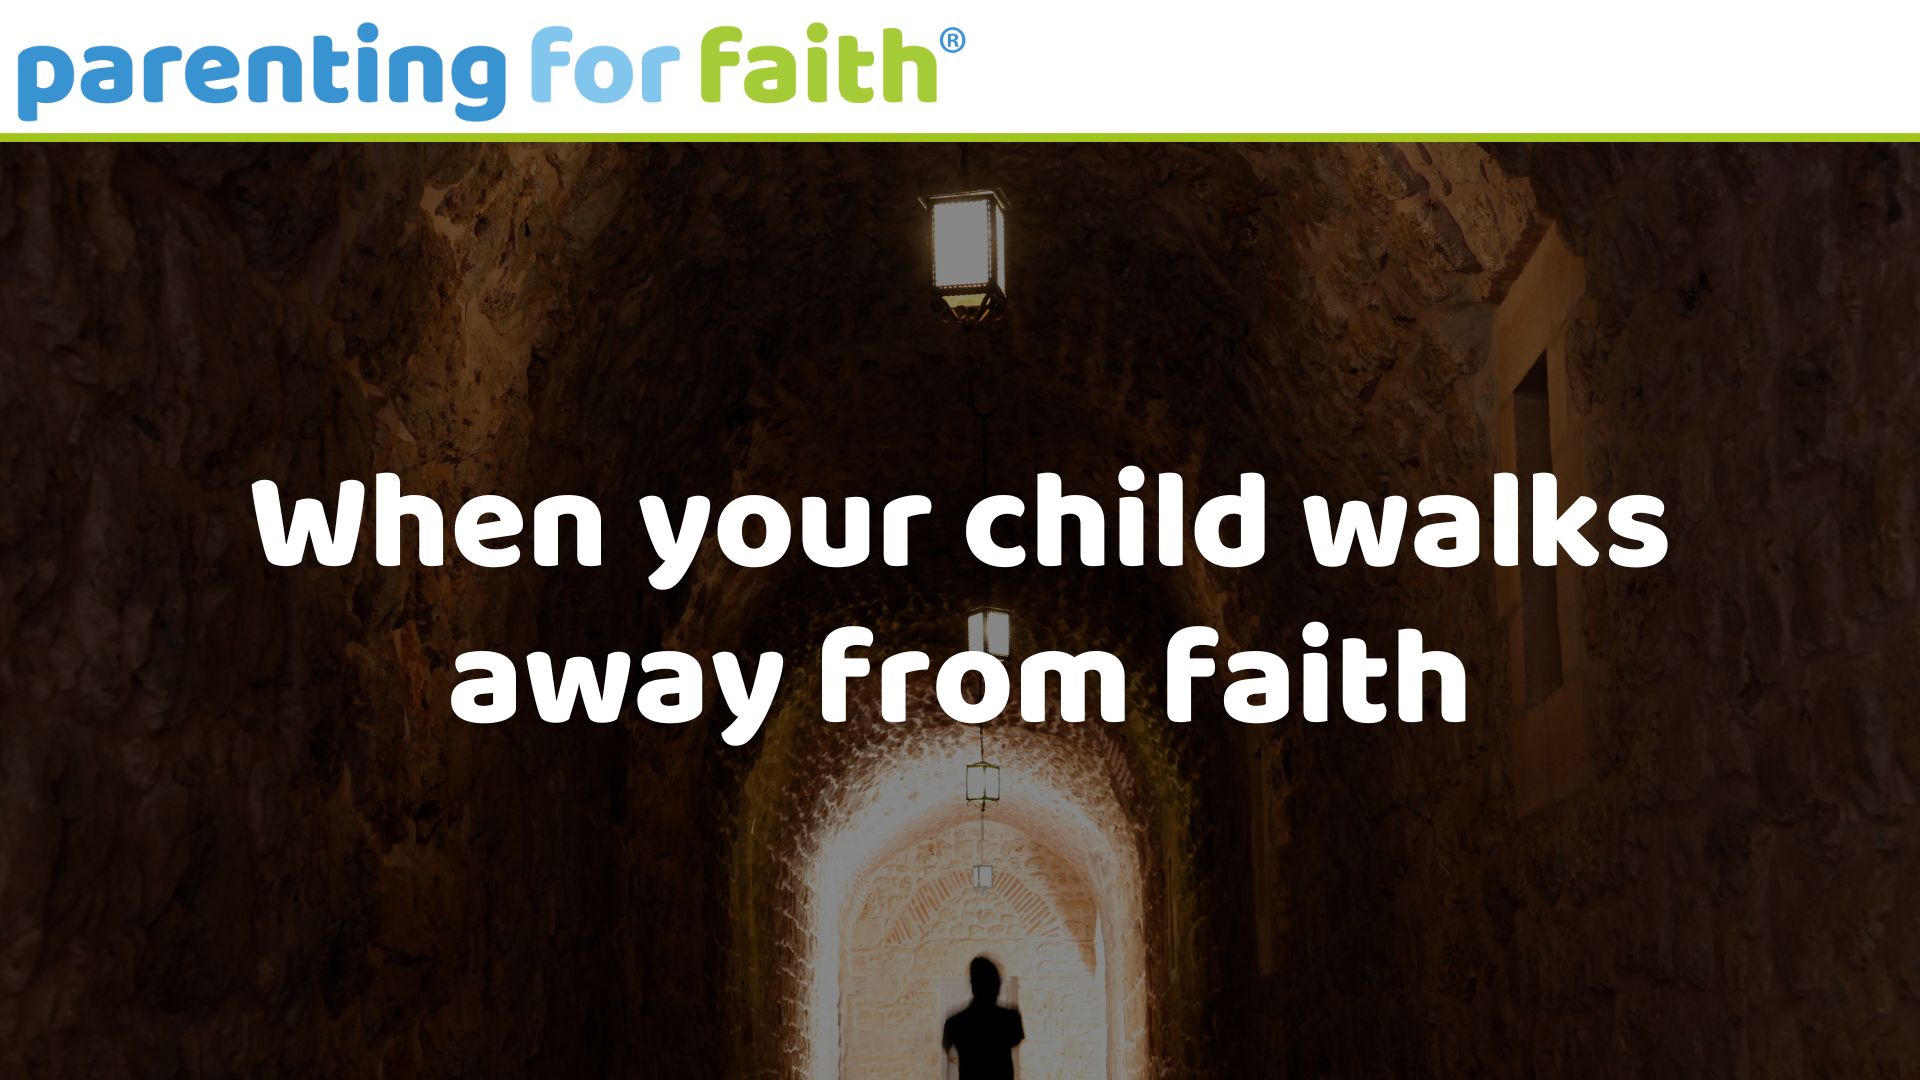 When your child walks away from faith image credit tolgart from Getty Images Signature